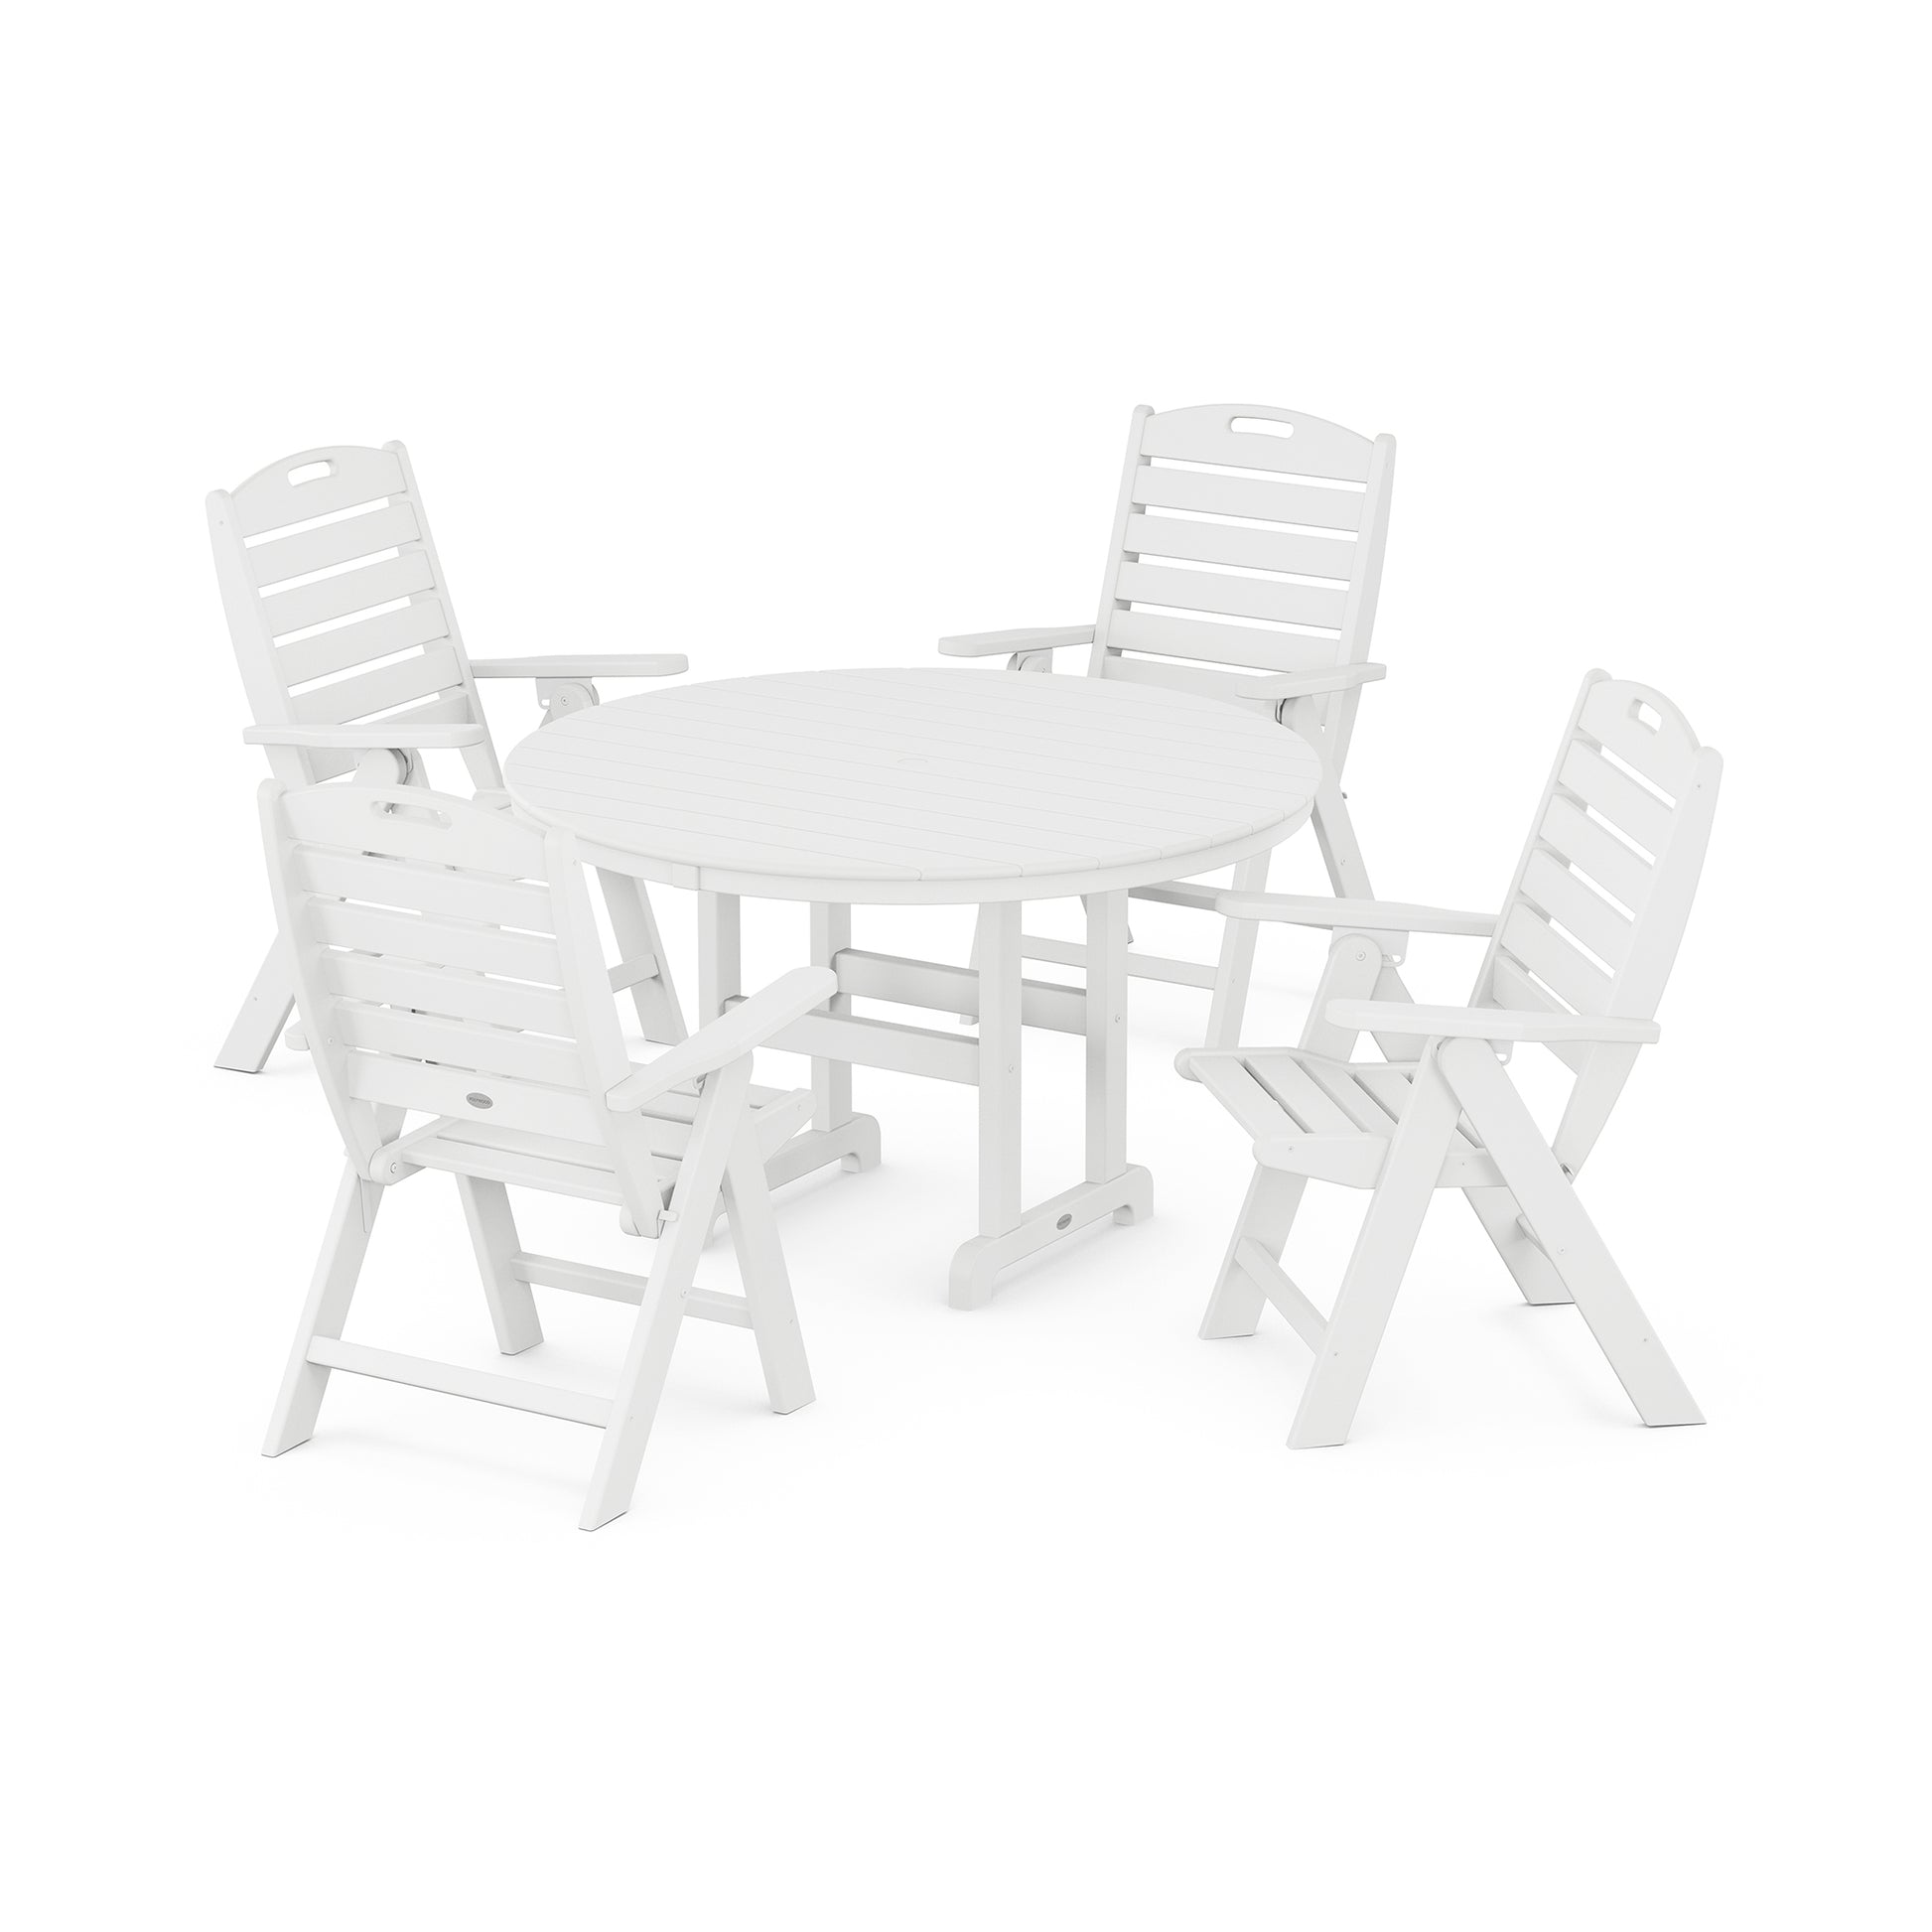 A white, circular POLYWOOD® Nautical 5-Piece Dining Set with four foldable chairs arranged around it, displayed on a plain white background.